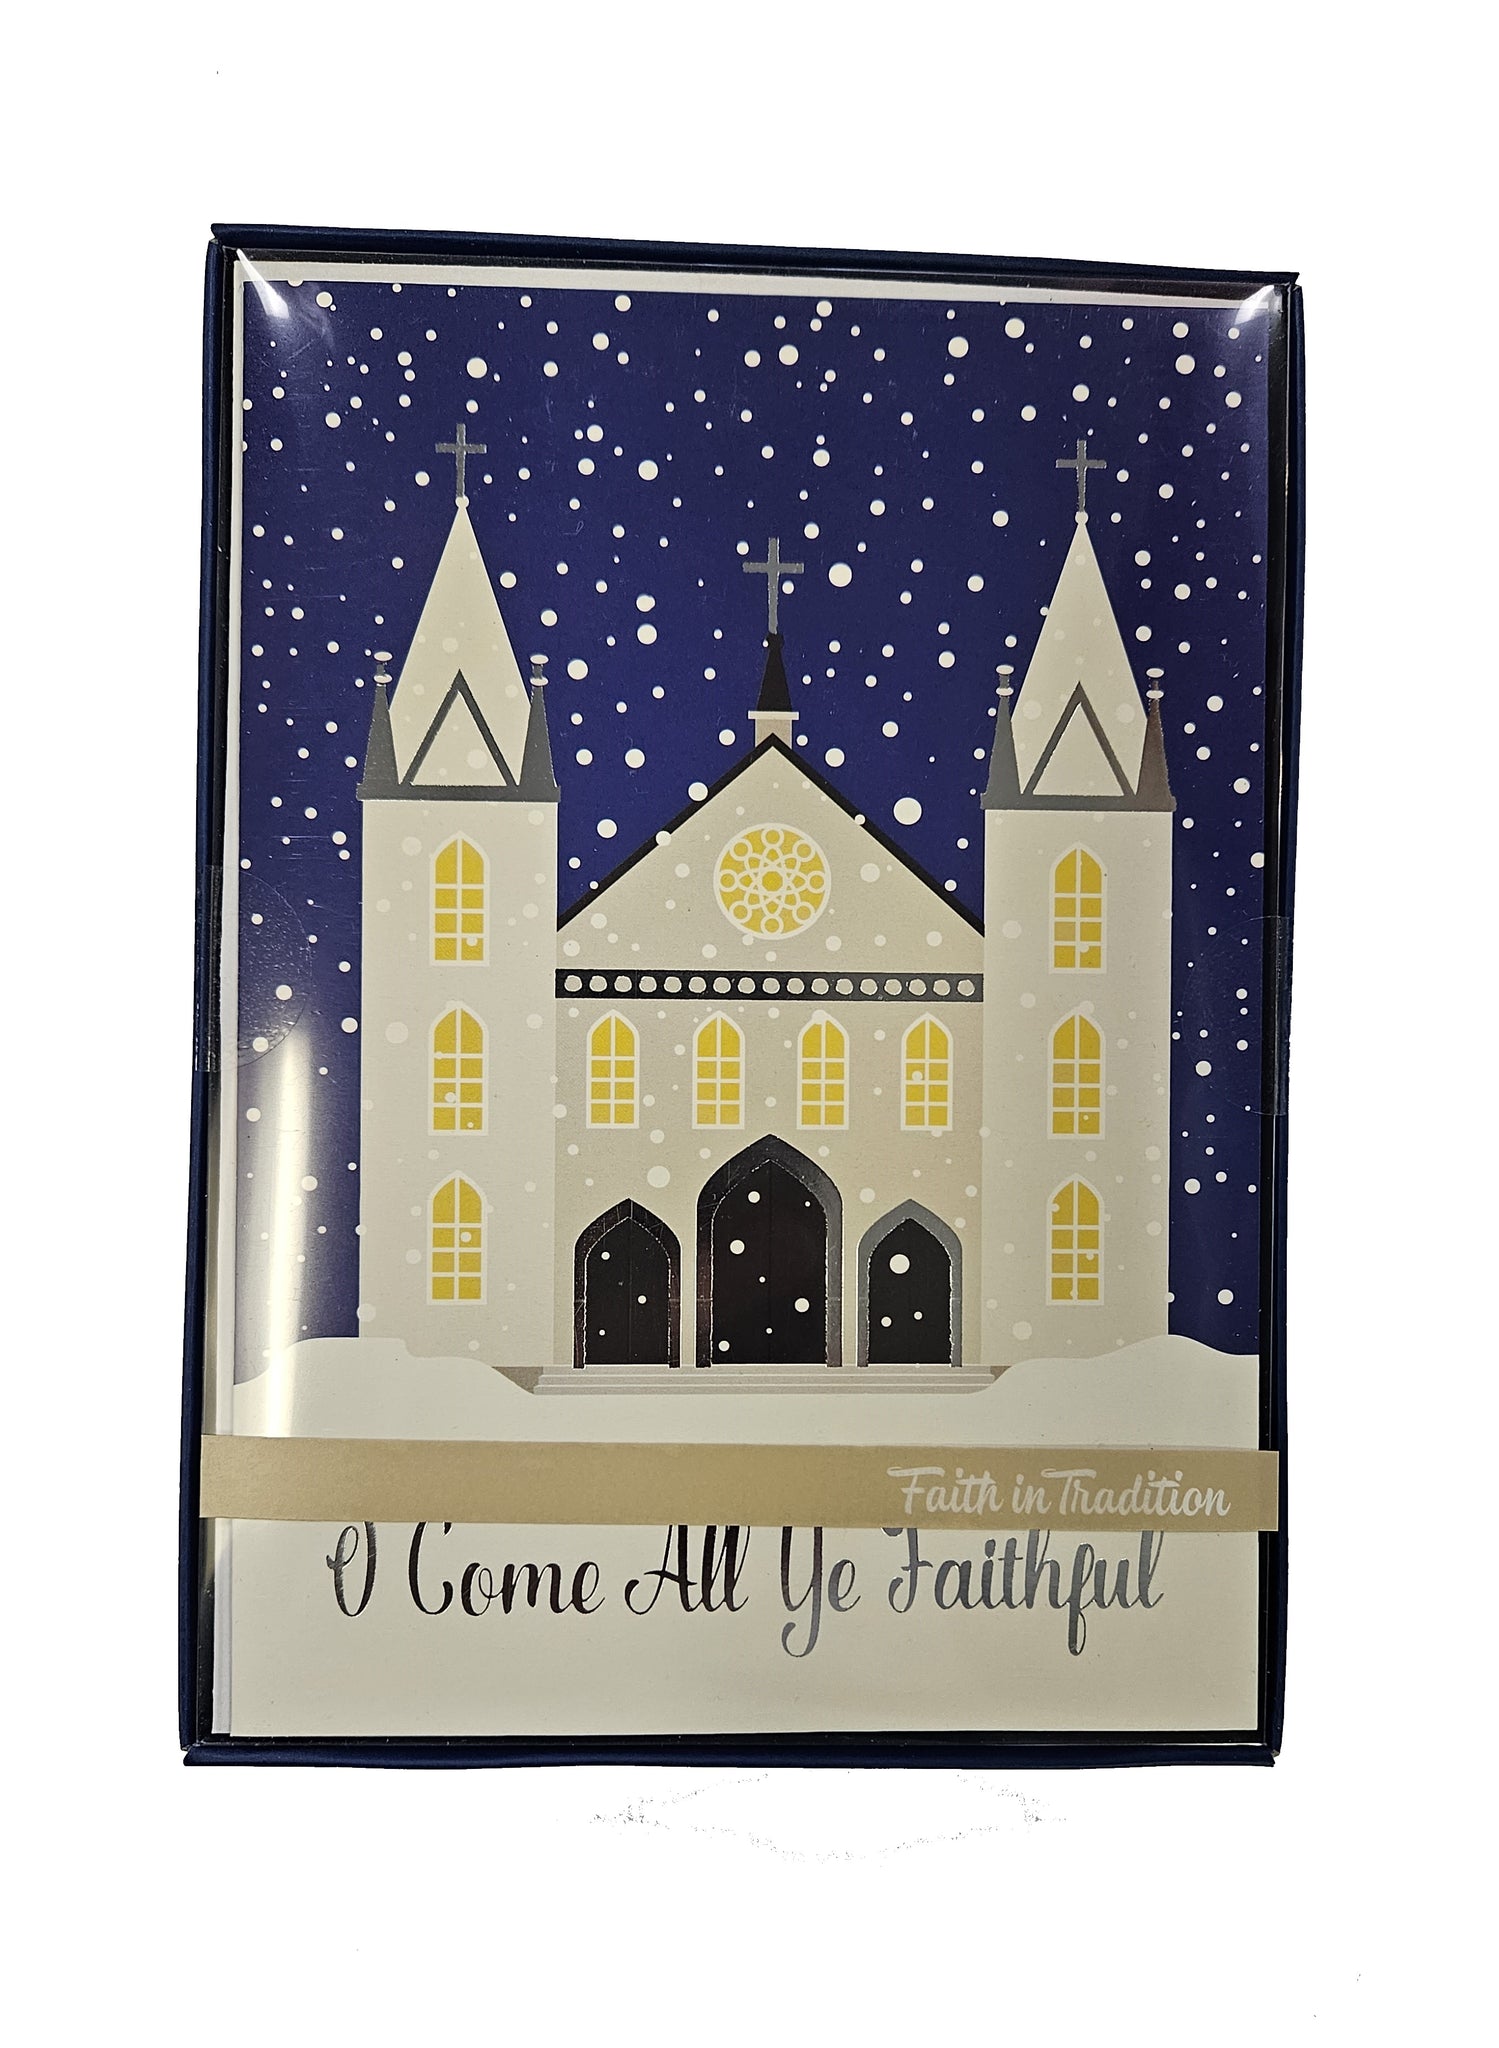 O Come All Ye Faithful - Religious Premium Boxed Holiday Cards - 16ct.